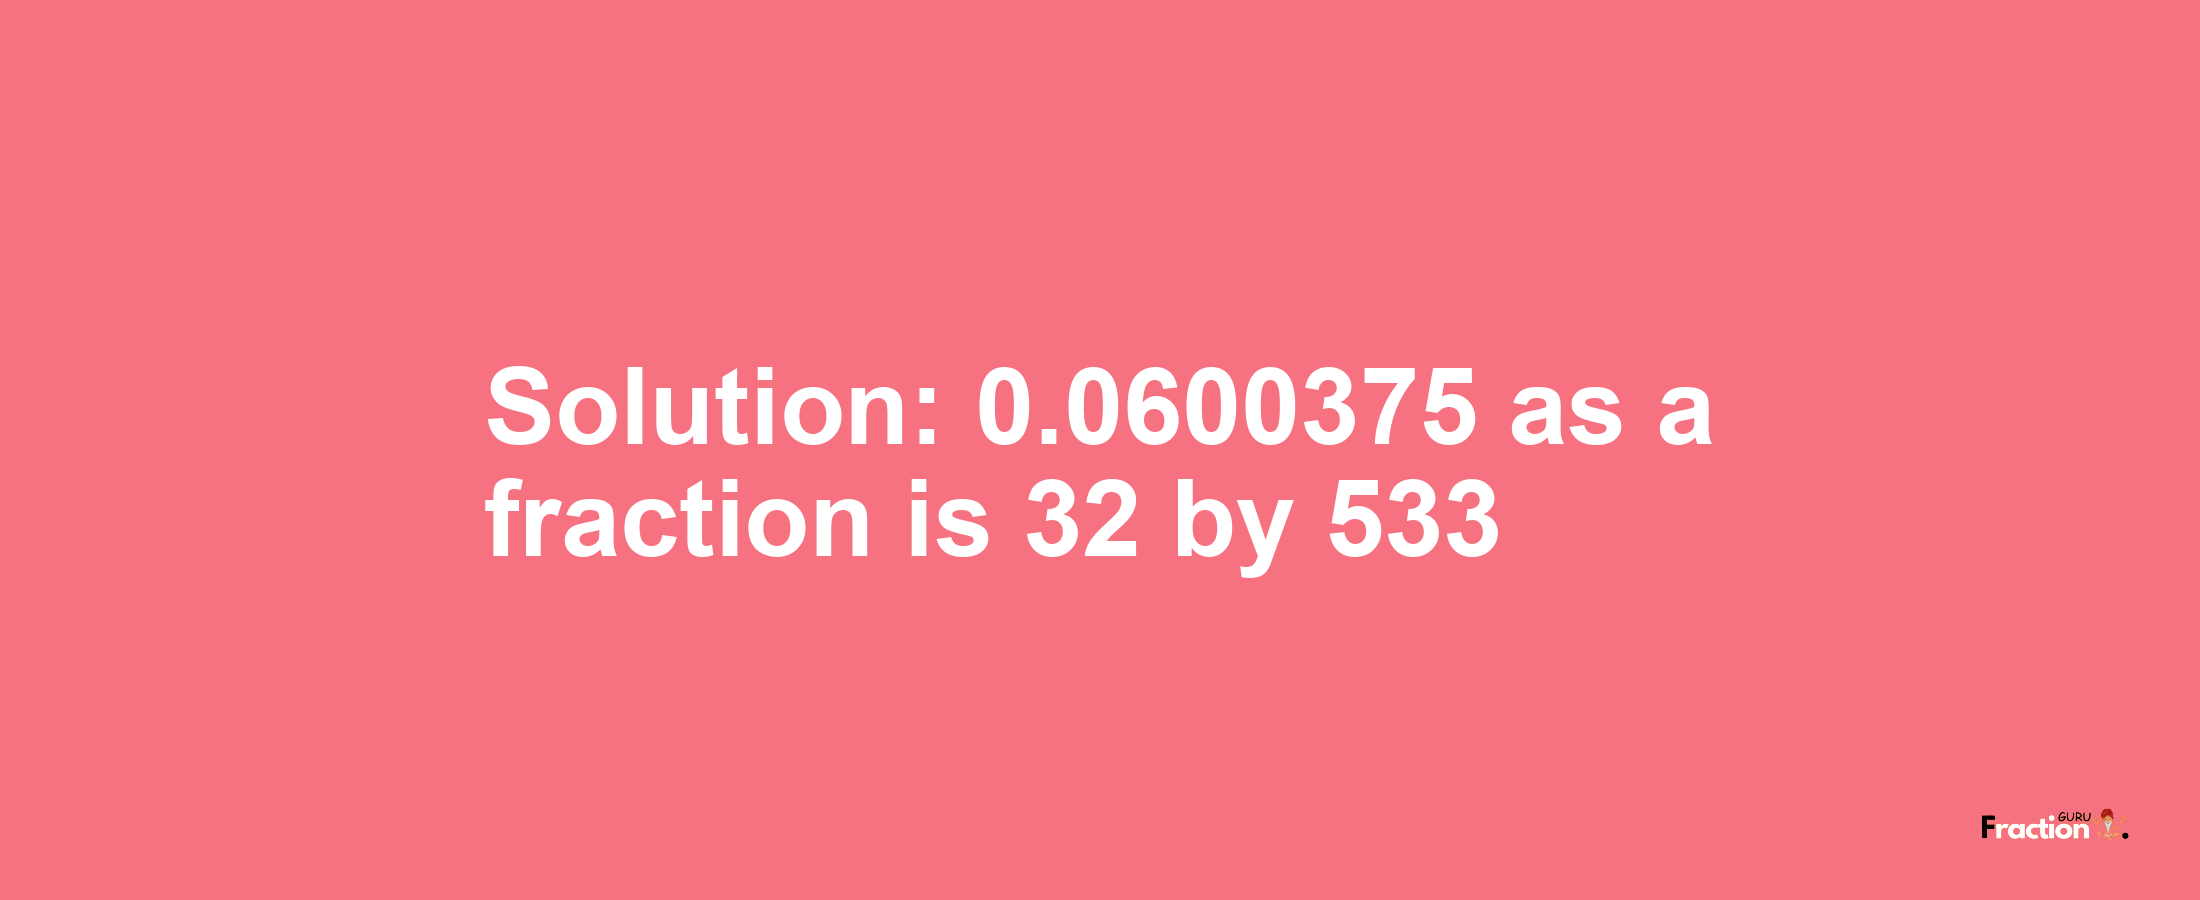 Solution:0.0600375 as a fraction is 32/533